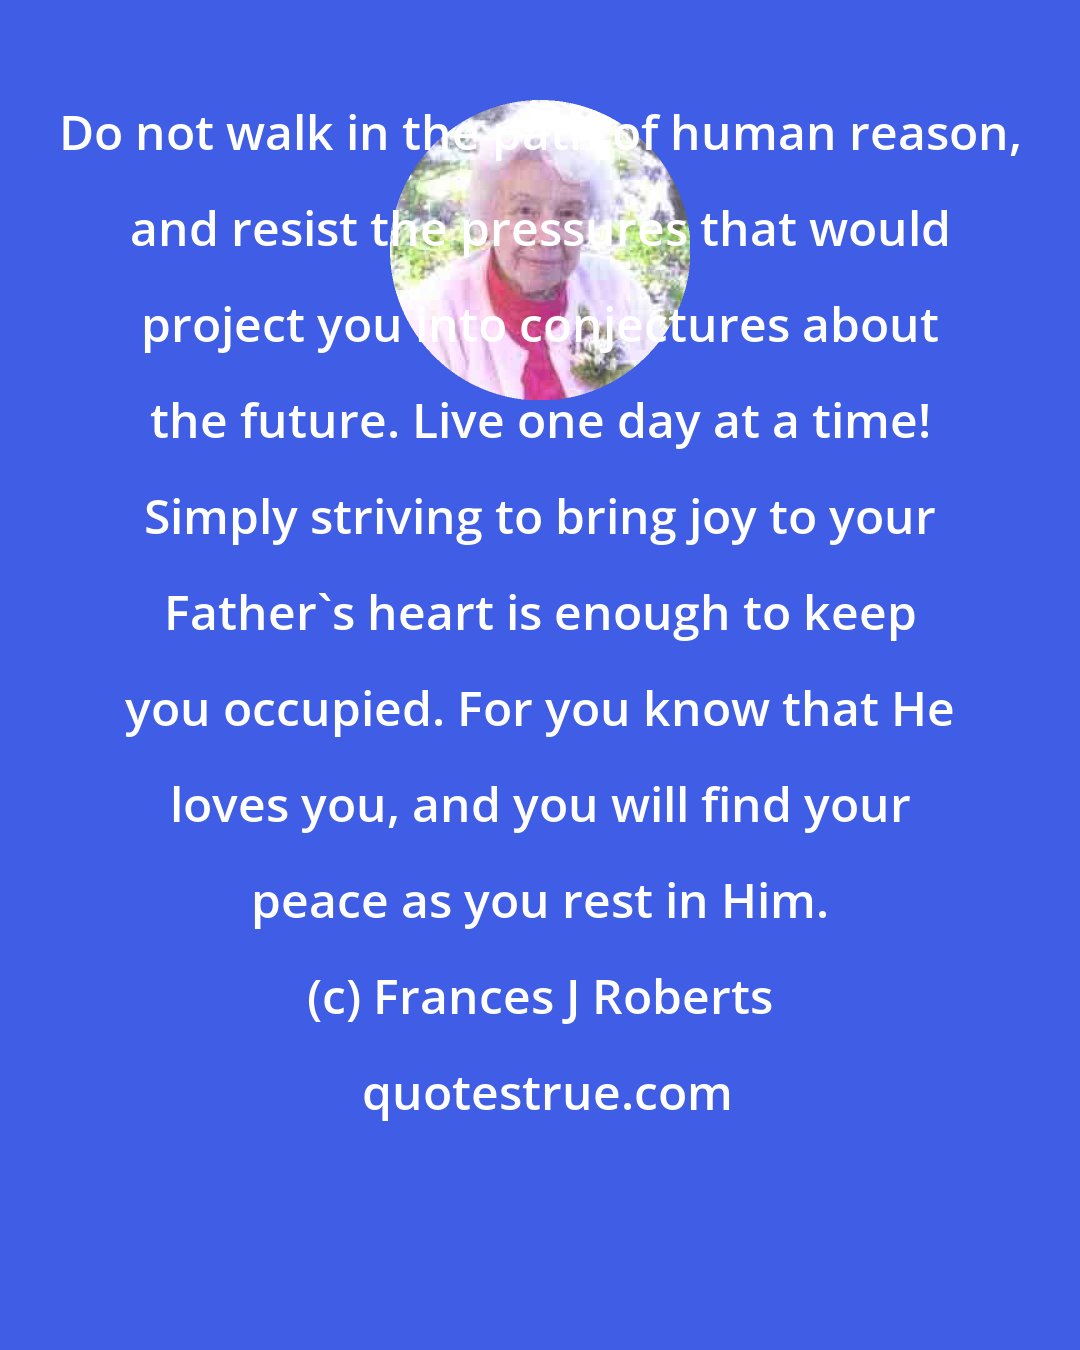 Frances J Roberts: Do not walk in the path of human reason, and resist the pressures that would project you into conjectures about the future. Live one day at a time! Simply striving to bring joy to your Father's heart is enough to keep you occupied. For you know that He loves you, and you will find your peace as you rest in Him.